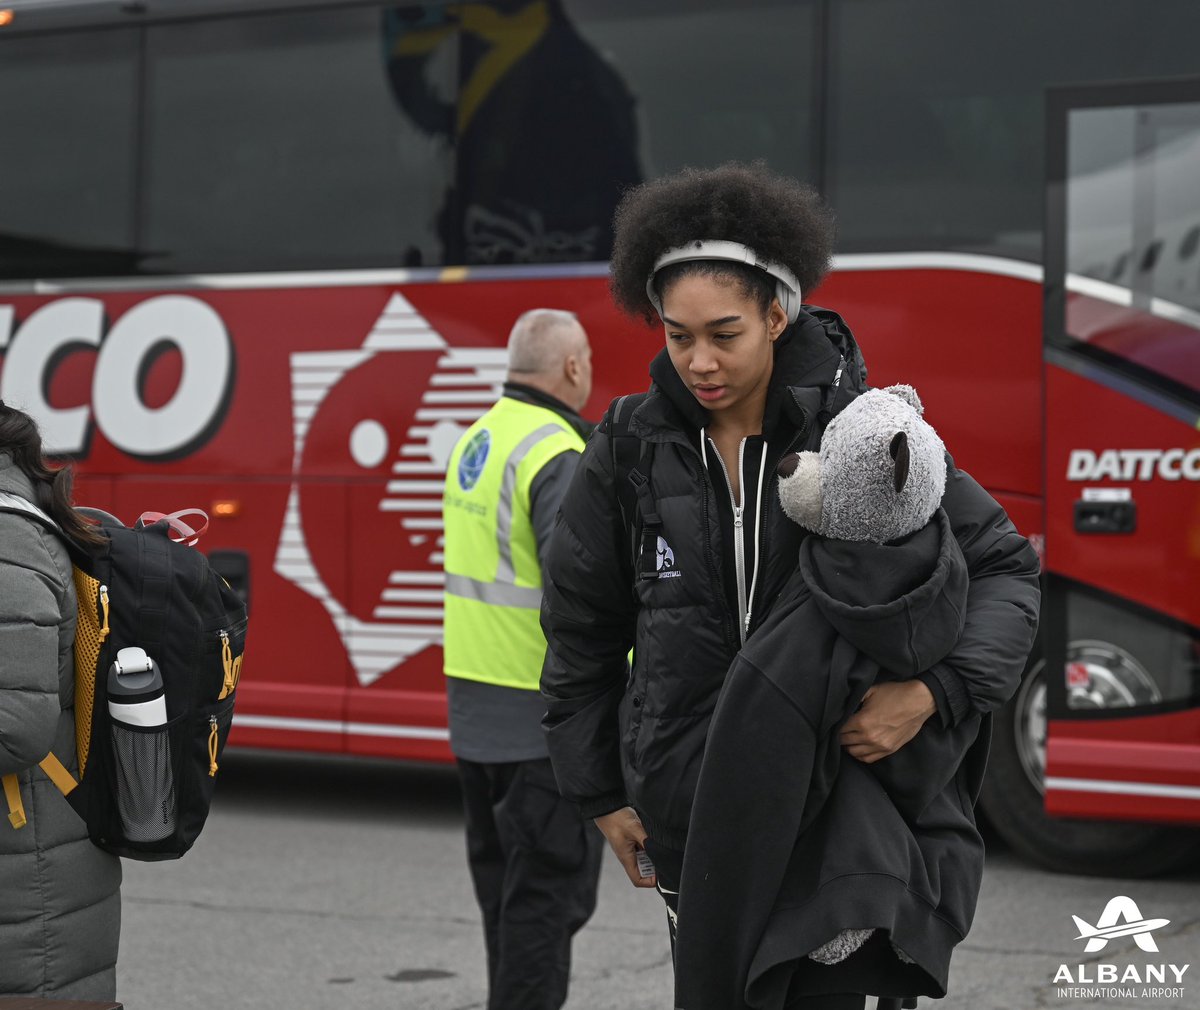 🏀 This afternoon @IowaWBB - @NCAA Albany Regional Champions - departed ALB following their win last night in downtown Albany that advanced them to the Final Four. It was our pleasure to assist with their travel & wish them all the best in their upcoming game against @UConnWBB.